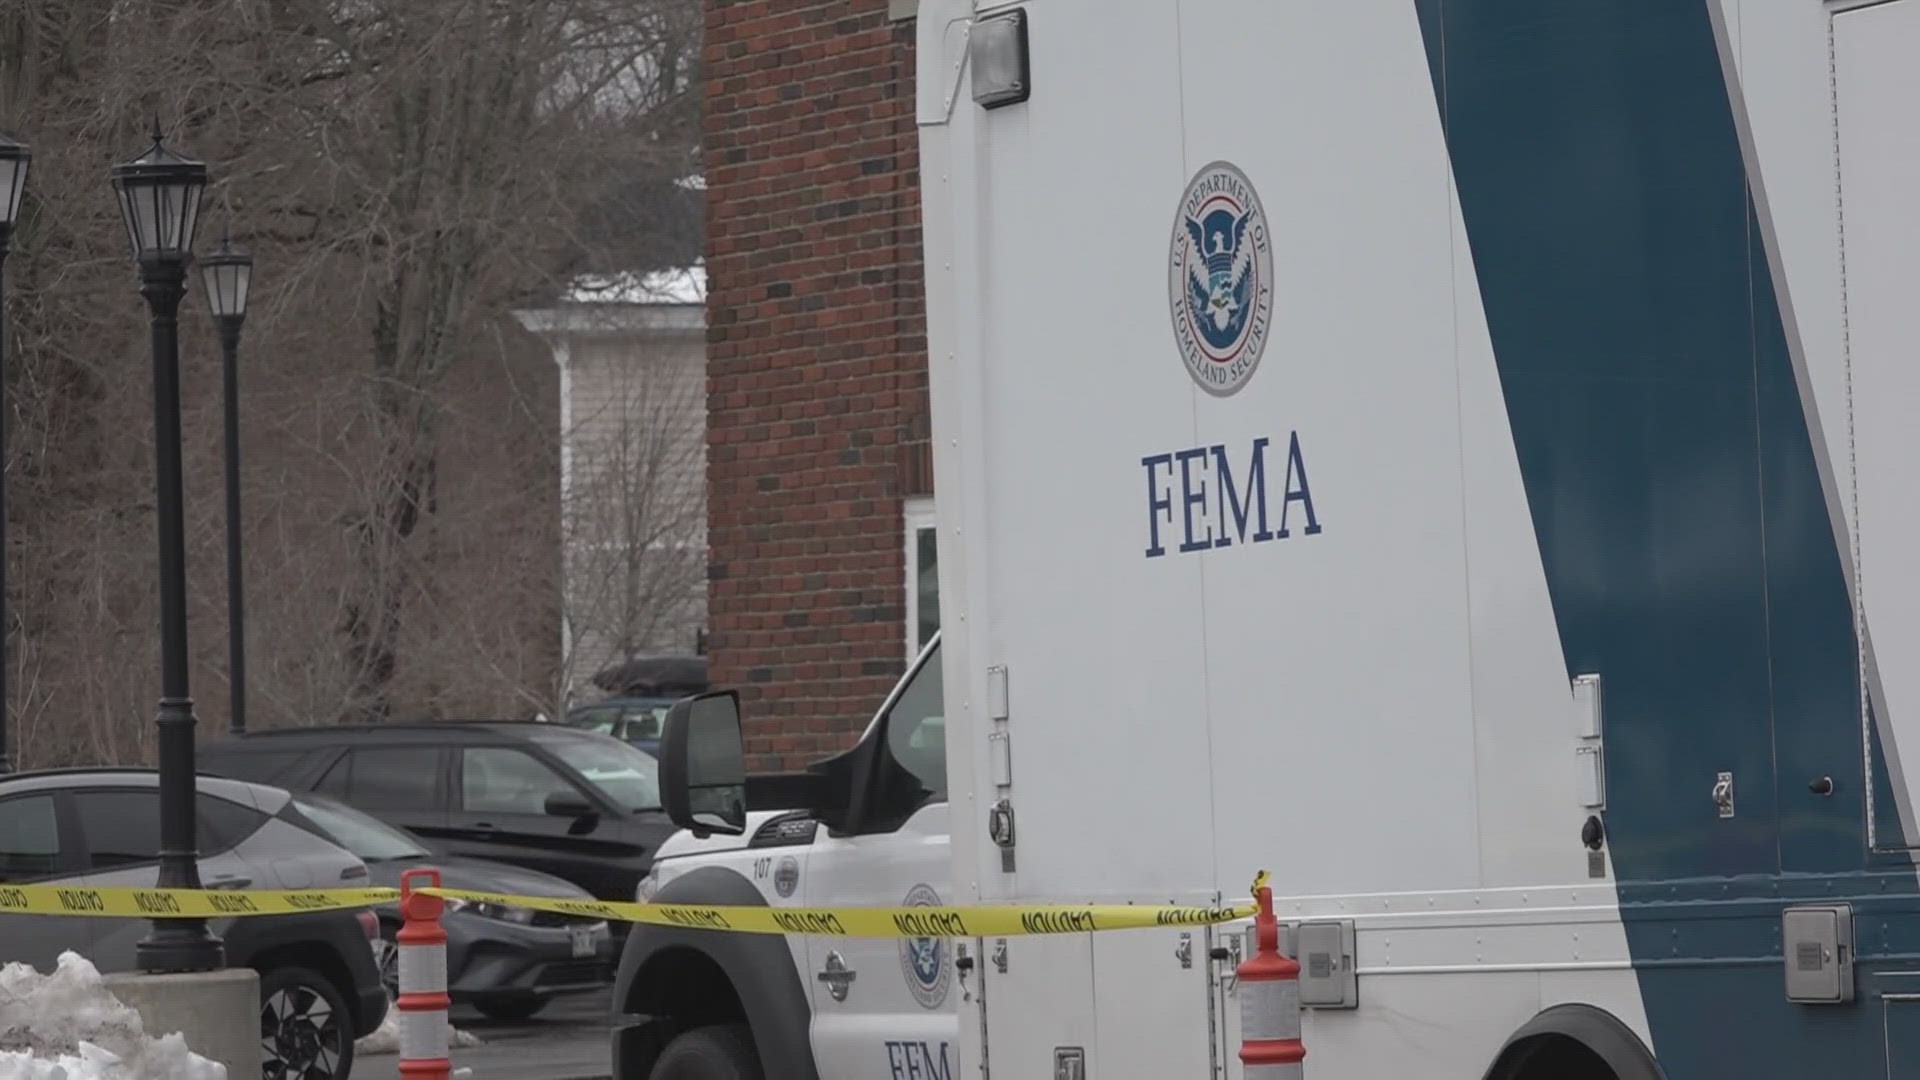 FEMA opened its second disaster recovery center Maine to support communities hit hard by the destructive January storms. The two sites are in Ellsworth and Wells.